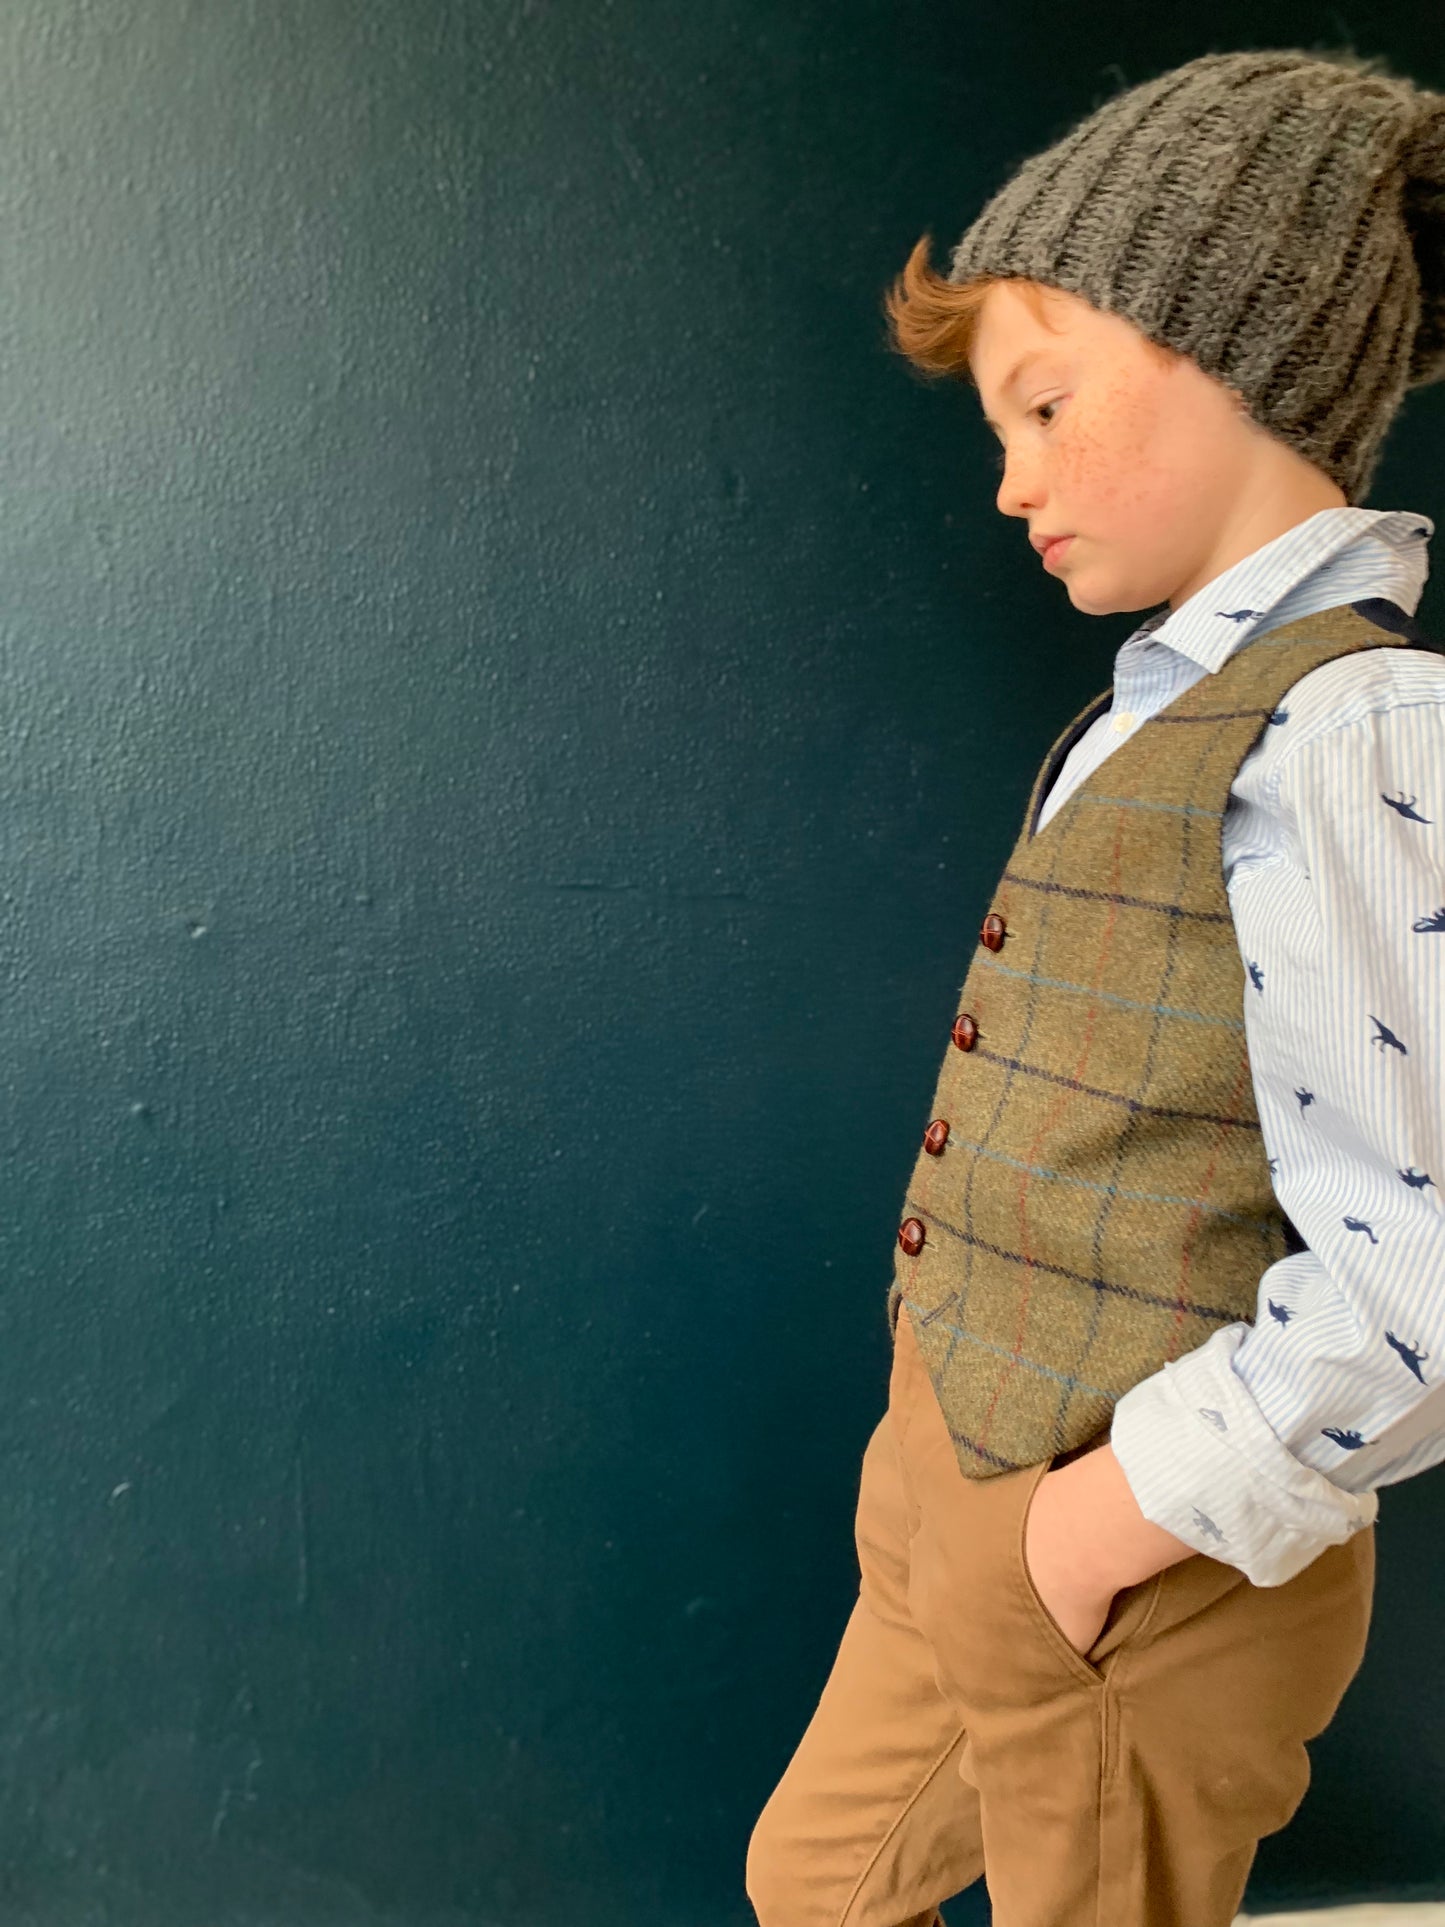 'Master George' Boys waistcoat handmade in soft olive green shetland wool with red, navy and blue over check.